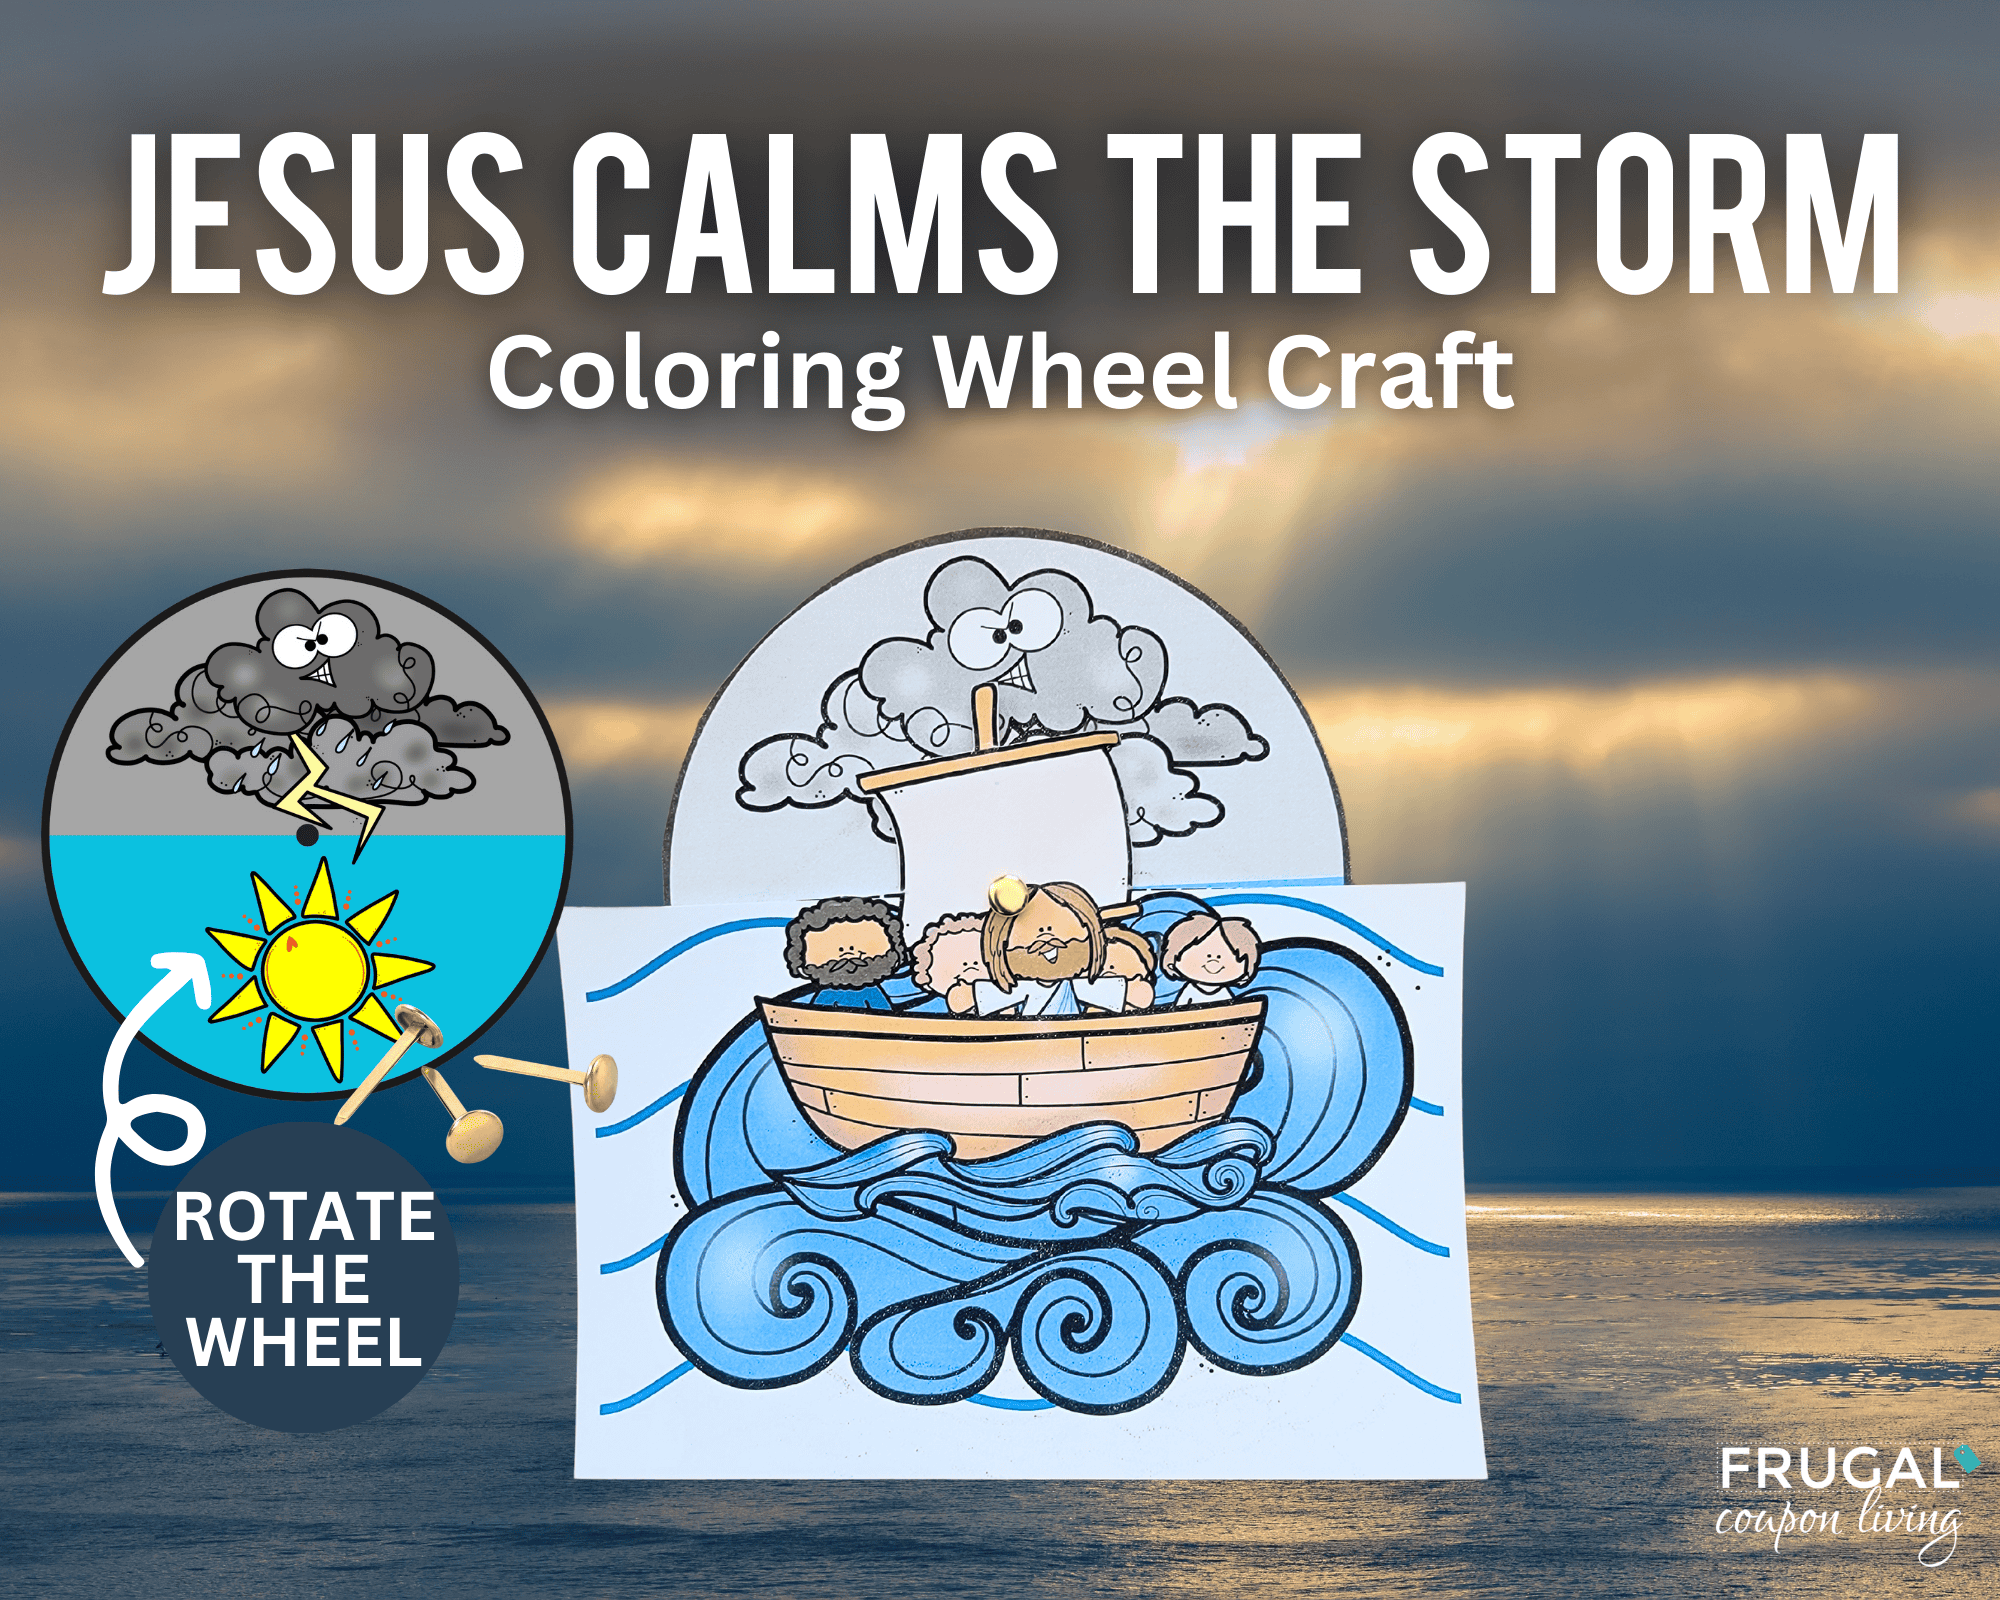 Jesus calms the storm coloring wheel craft for kids